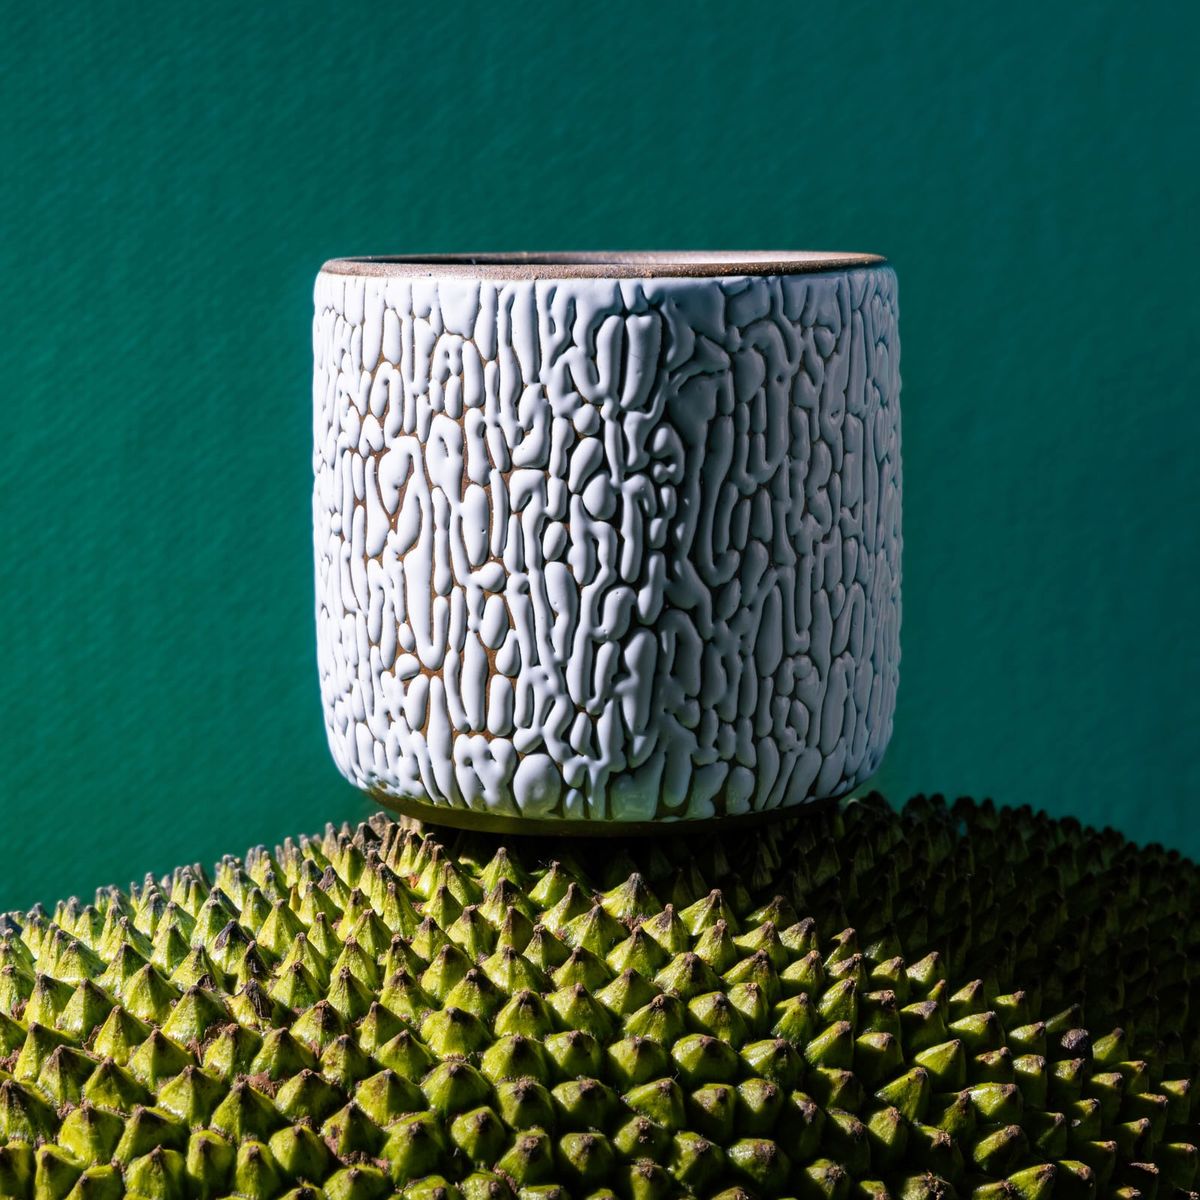 A white ceramic vessel with cracked texture sits on top of a green textured sphere with a dark teal background